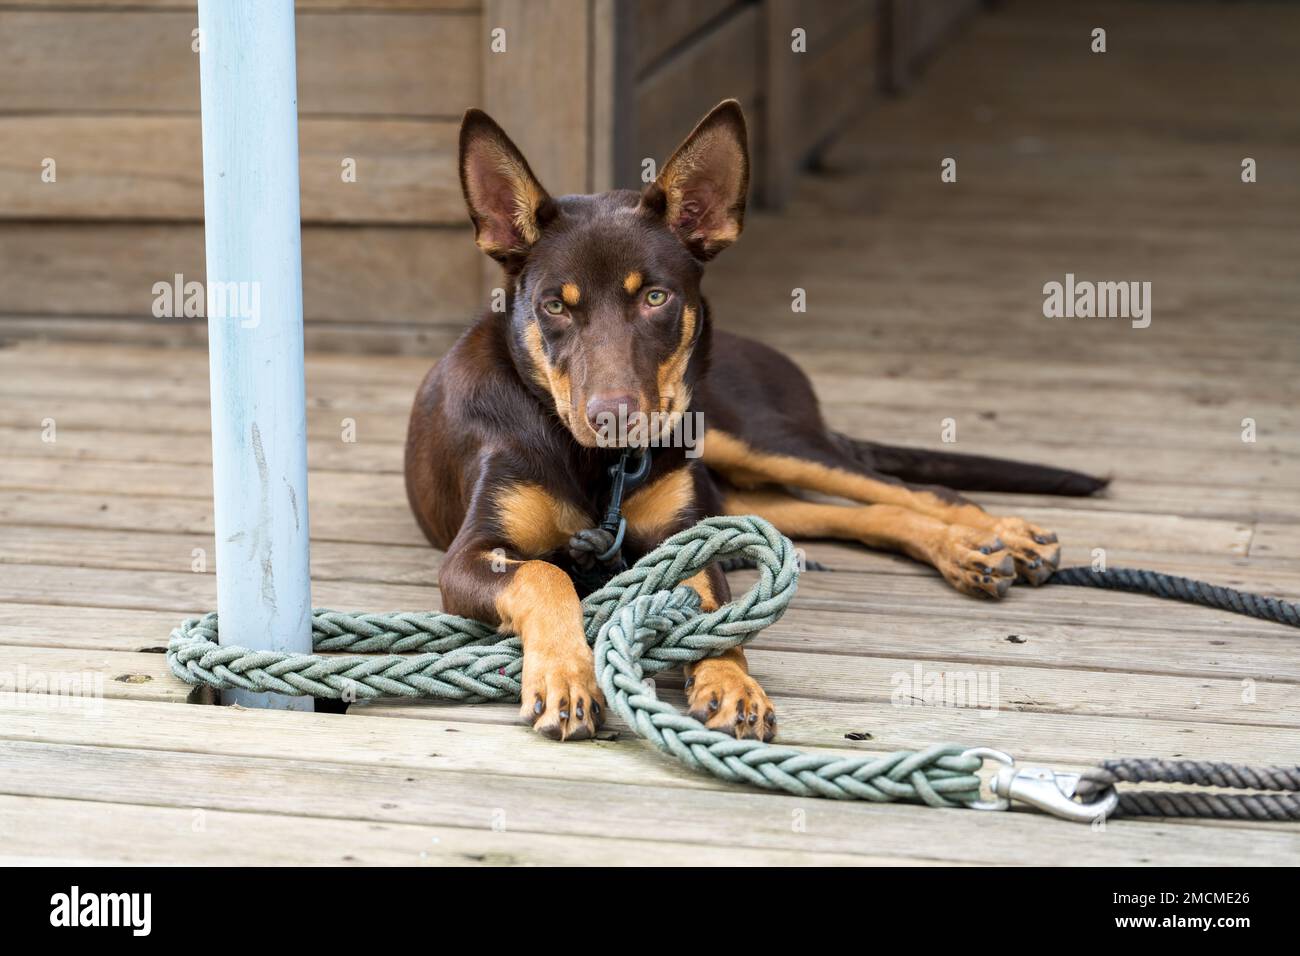 Young red and tan Australian Kelpie dog, lying down with ears pricked, looking at the camera. Stock Photo